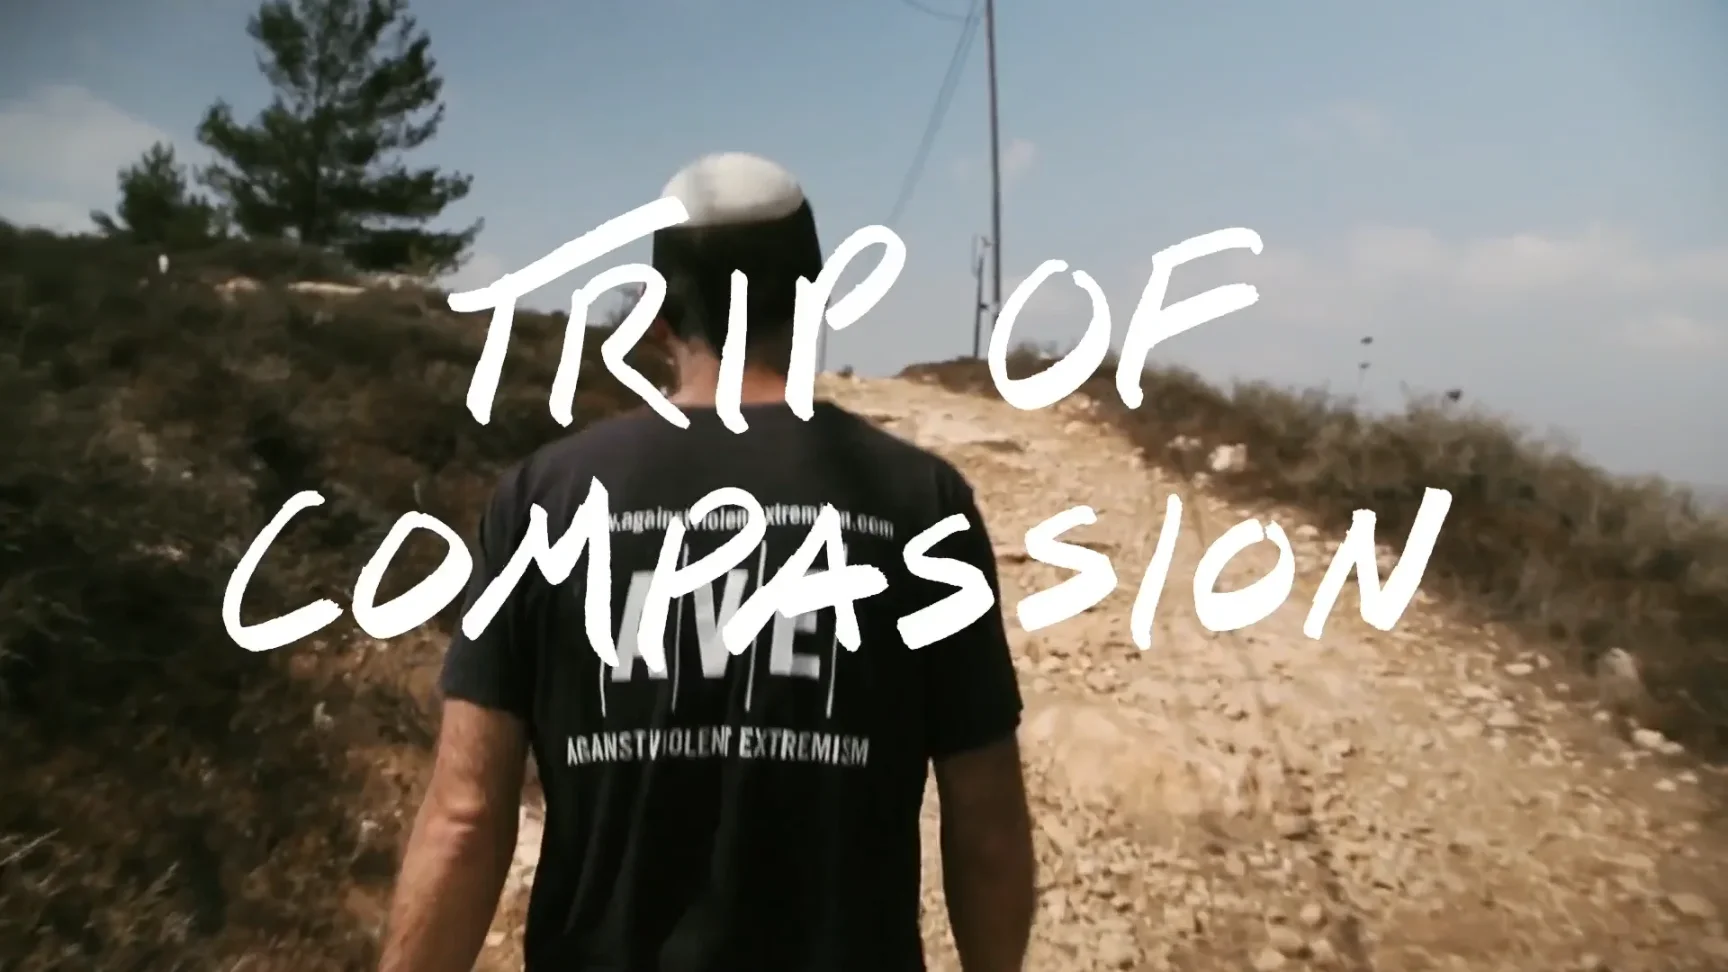 Trip of compassion Tim ferriss documentary psychedelics